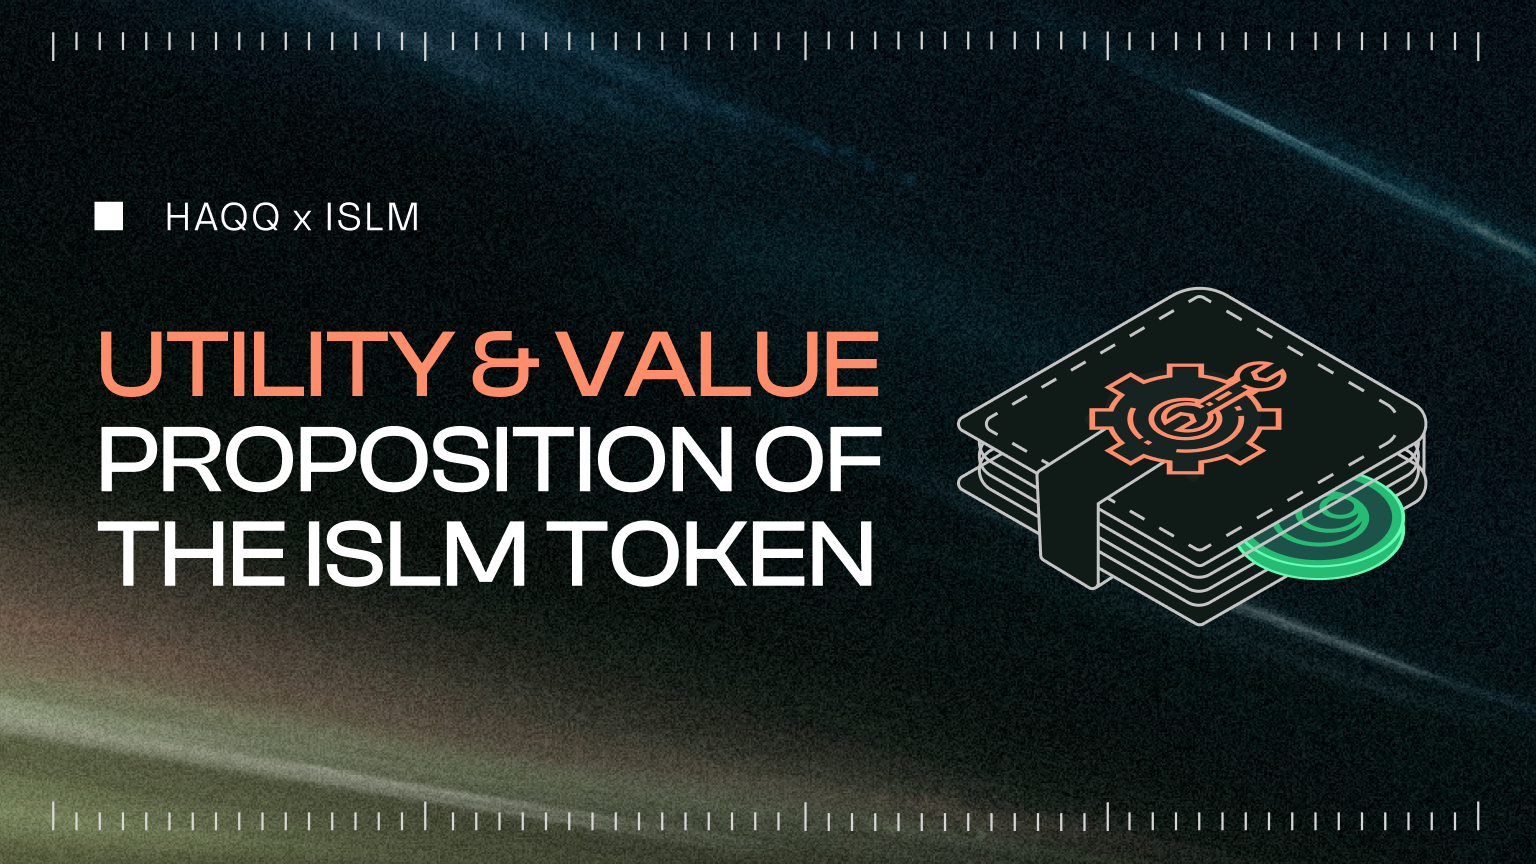 The Utility and Value Proposition of the ISLM Token